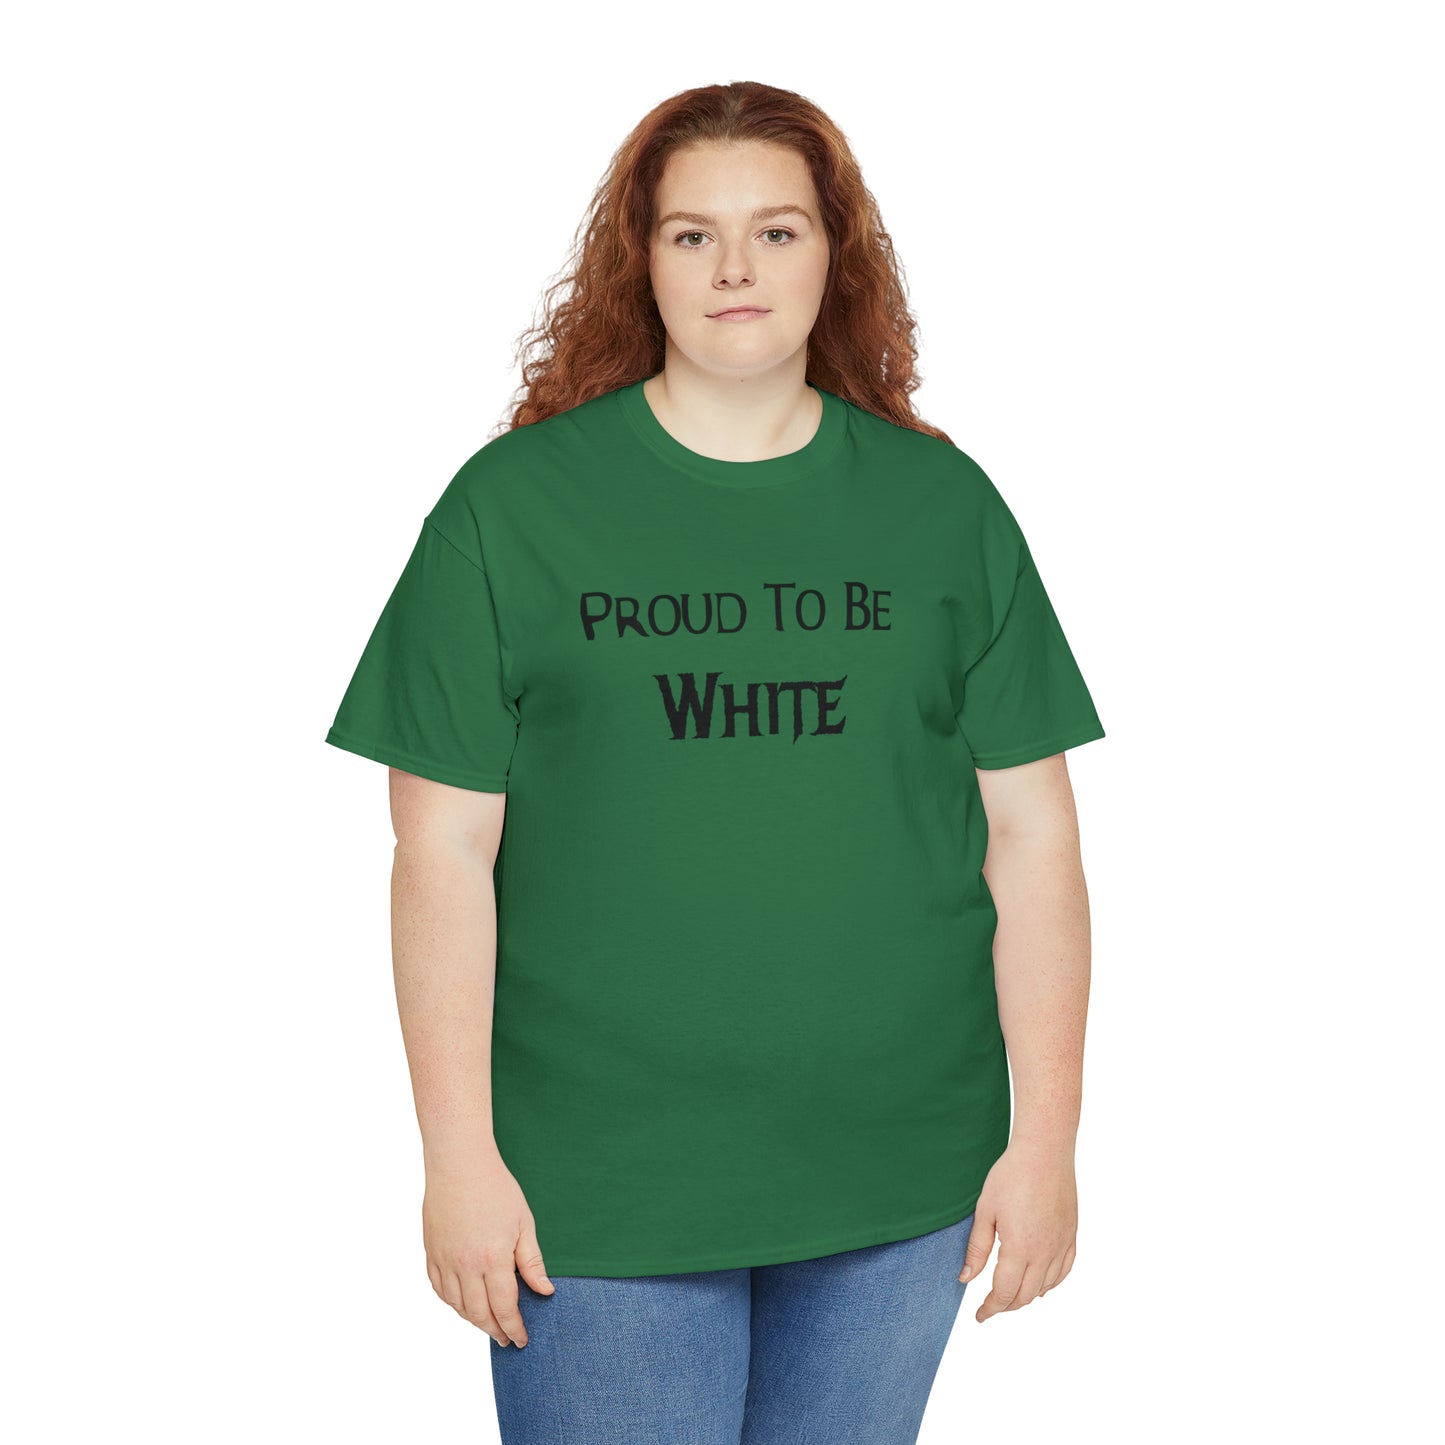 "Proud To Be White" T-Shirt - Weave Got Gifts - Unique Gifts You Won’t Find Anywhere Else!